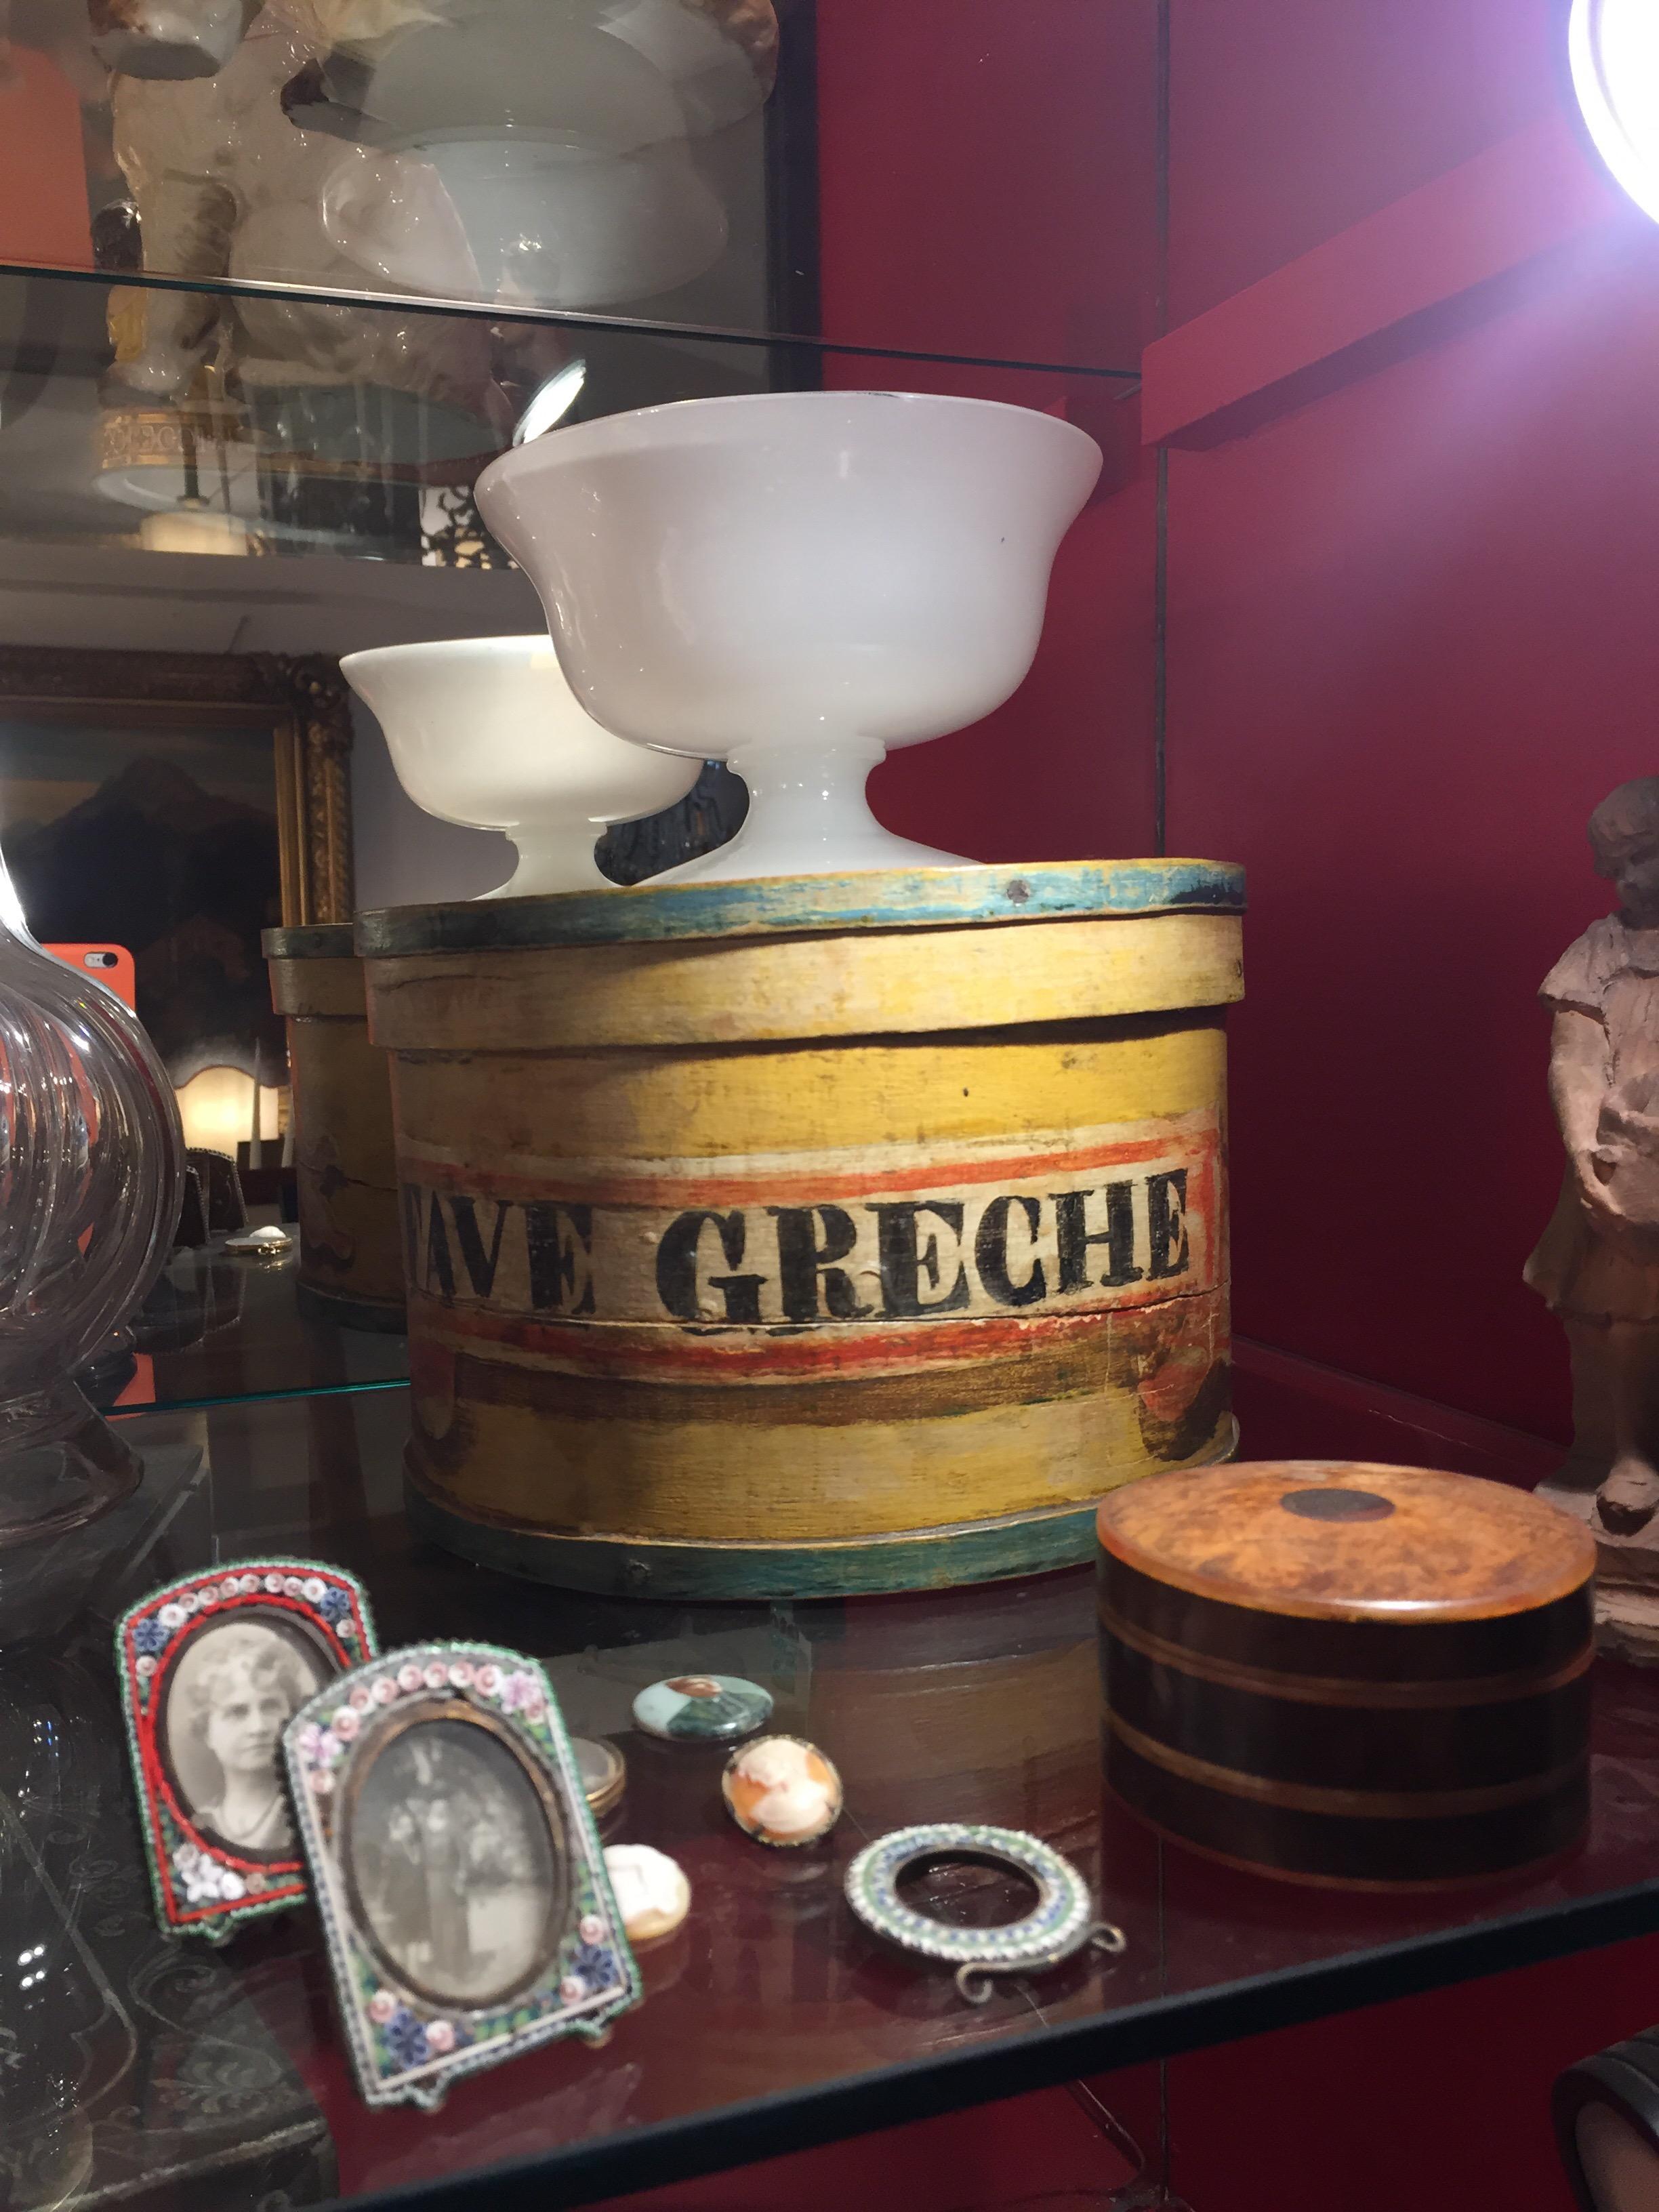 An Italian 19th century lidded beechwood box, an antique food storage container suitable for dried legumes, as per the Italian inscription FAVE GRECHE, meaning Greek Beans, a common food throughout the Mediterranean territories. 
Magnificent